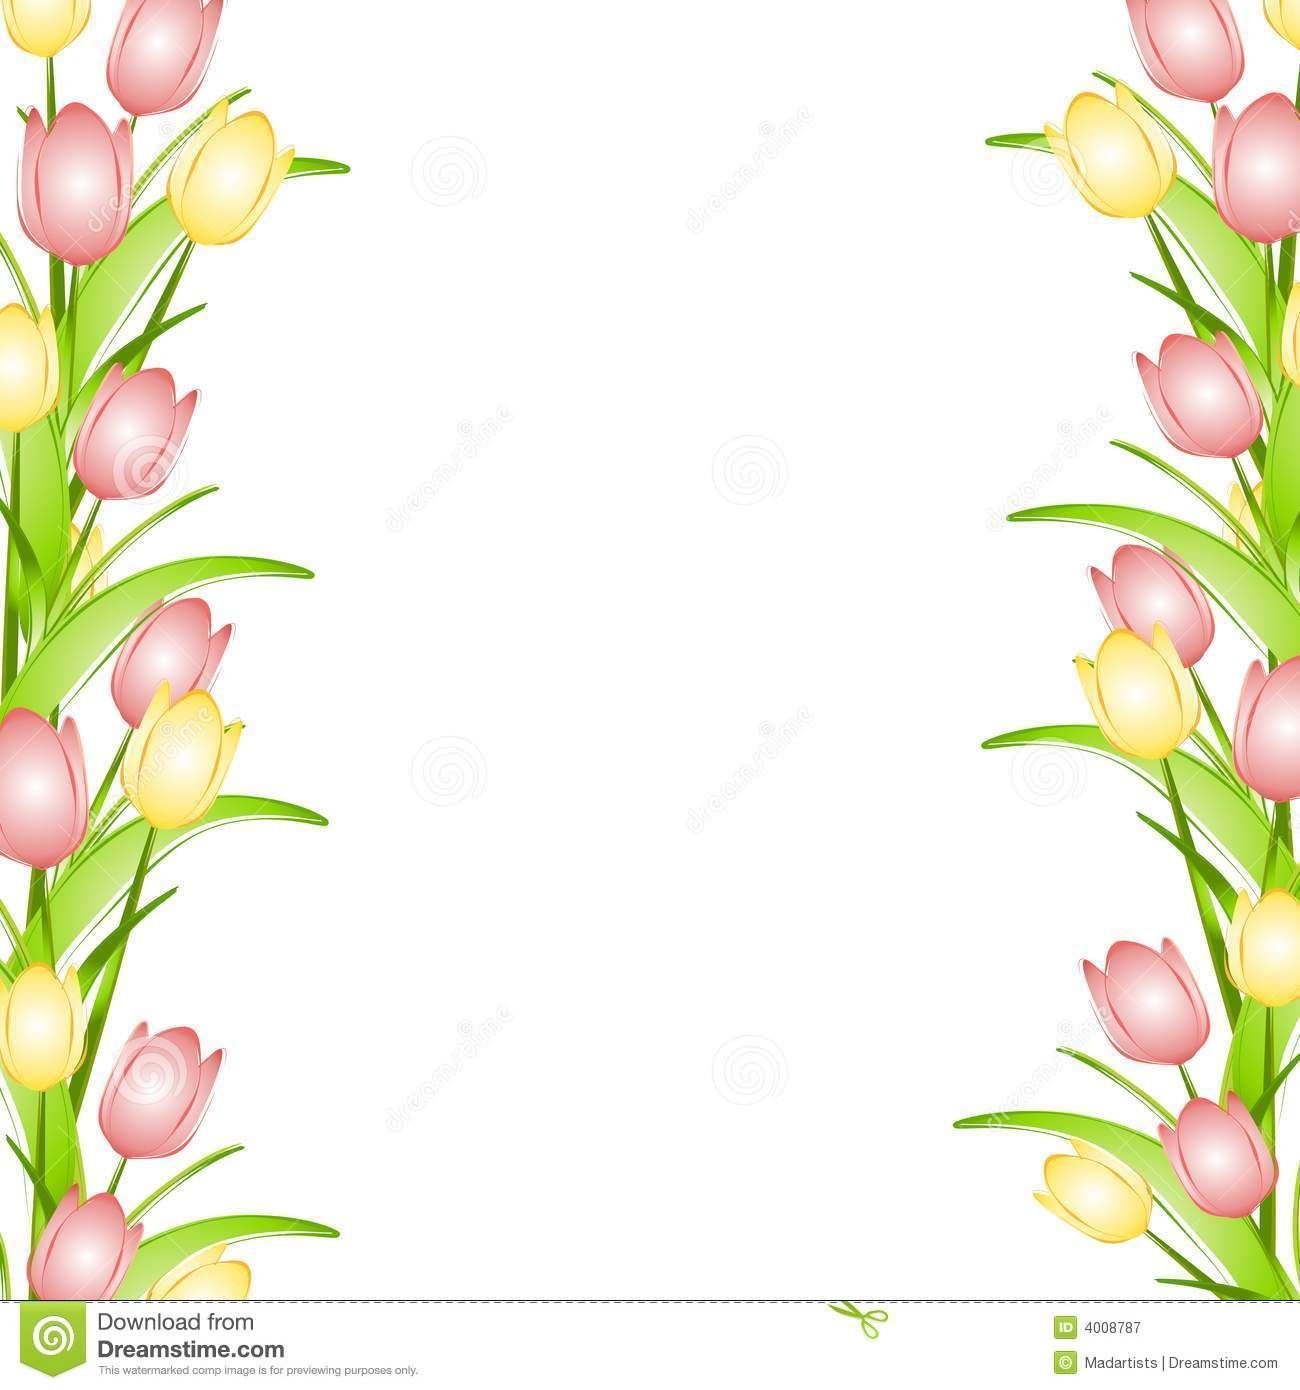 Free spring borders and backgrounds